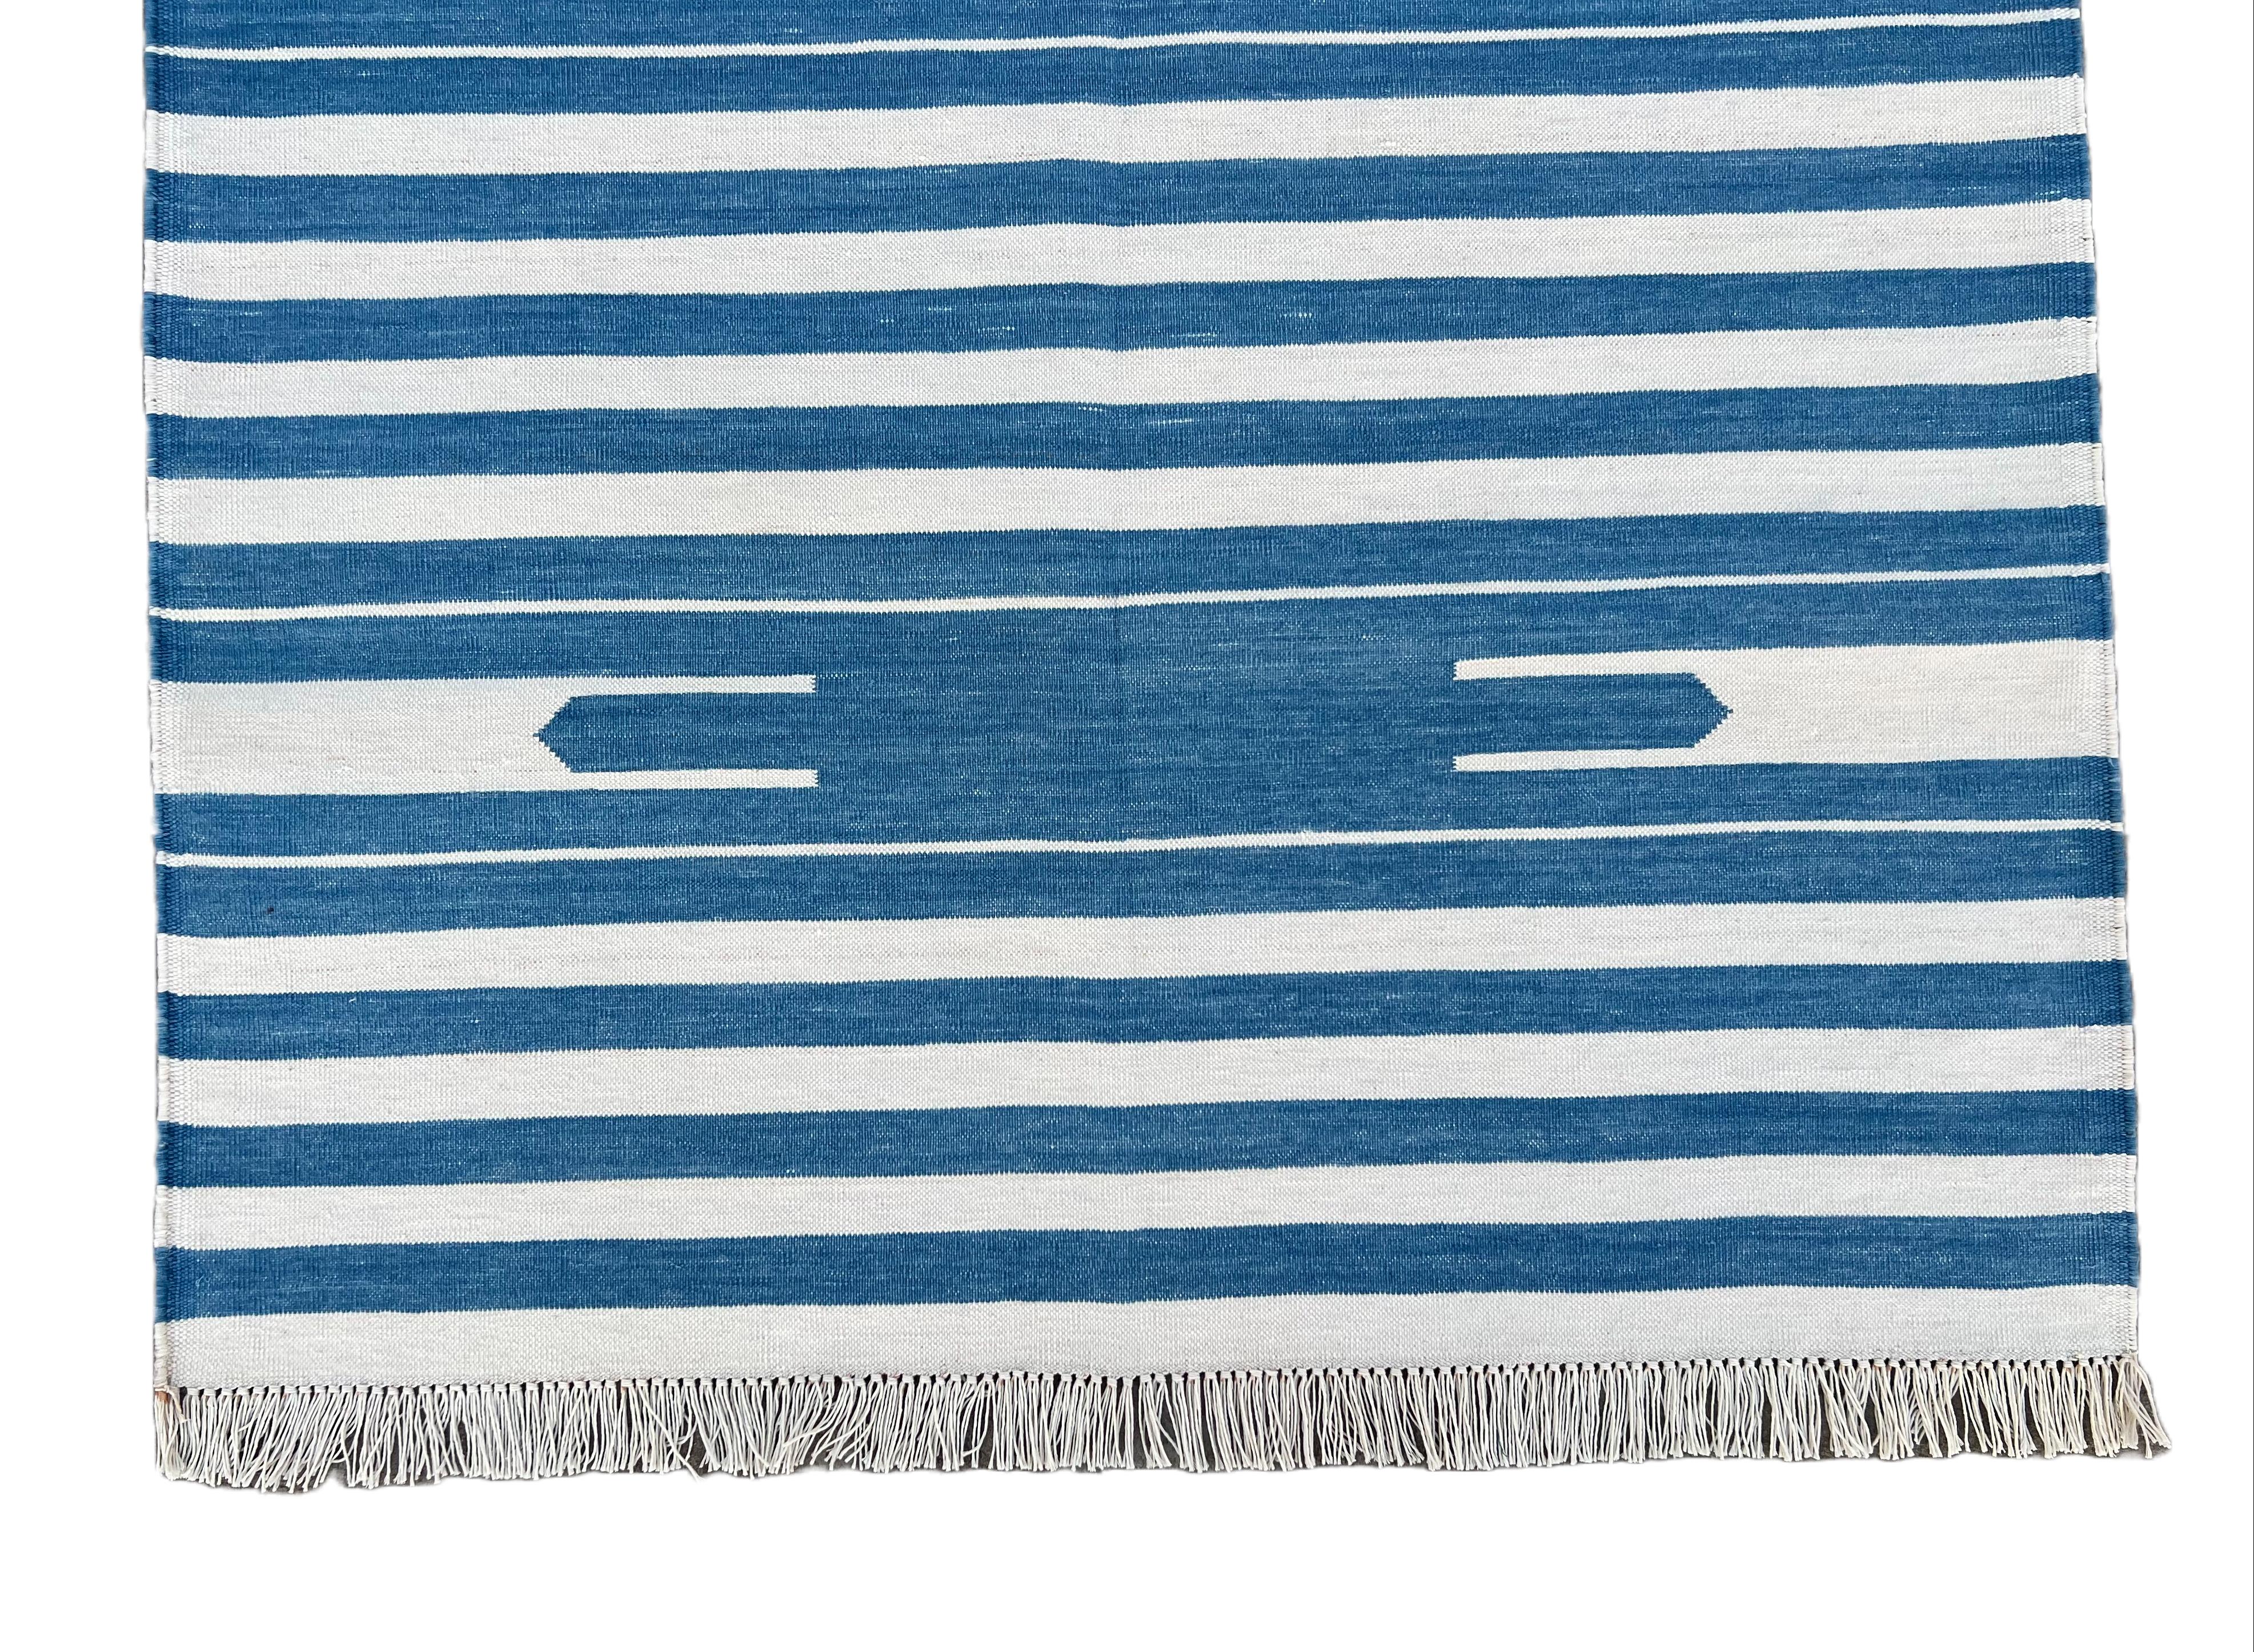 Contemporary Handmade Cotton Area Flat Weave Rug, 3'x5' Blue And White Striped Indian Dhurrie For Sale